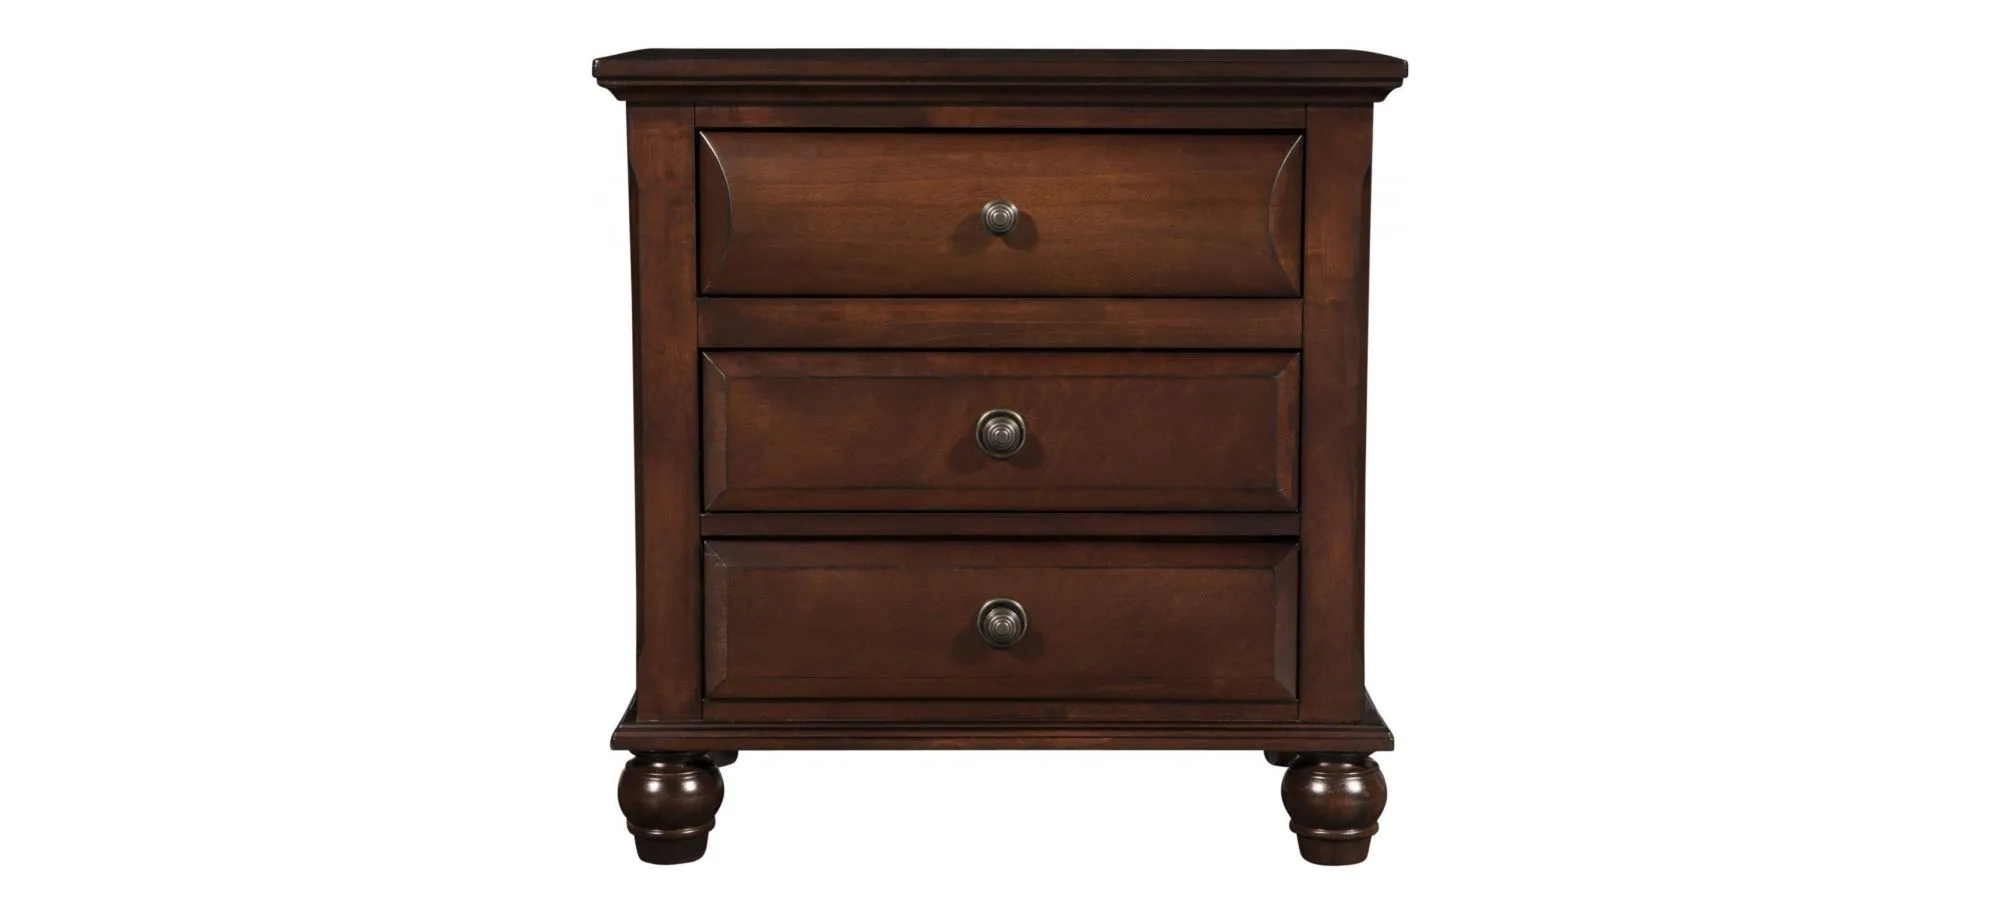 Clarion Nightstand in Brown Cherry by Bellanest